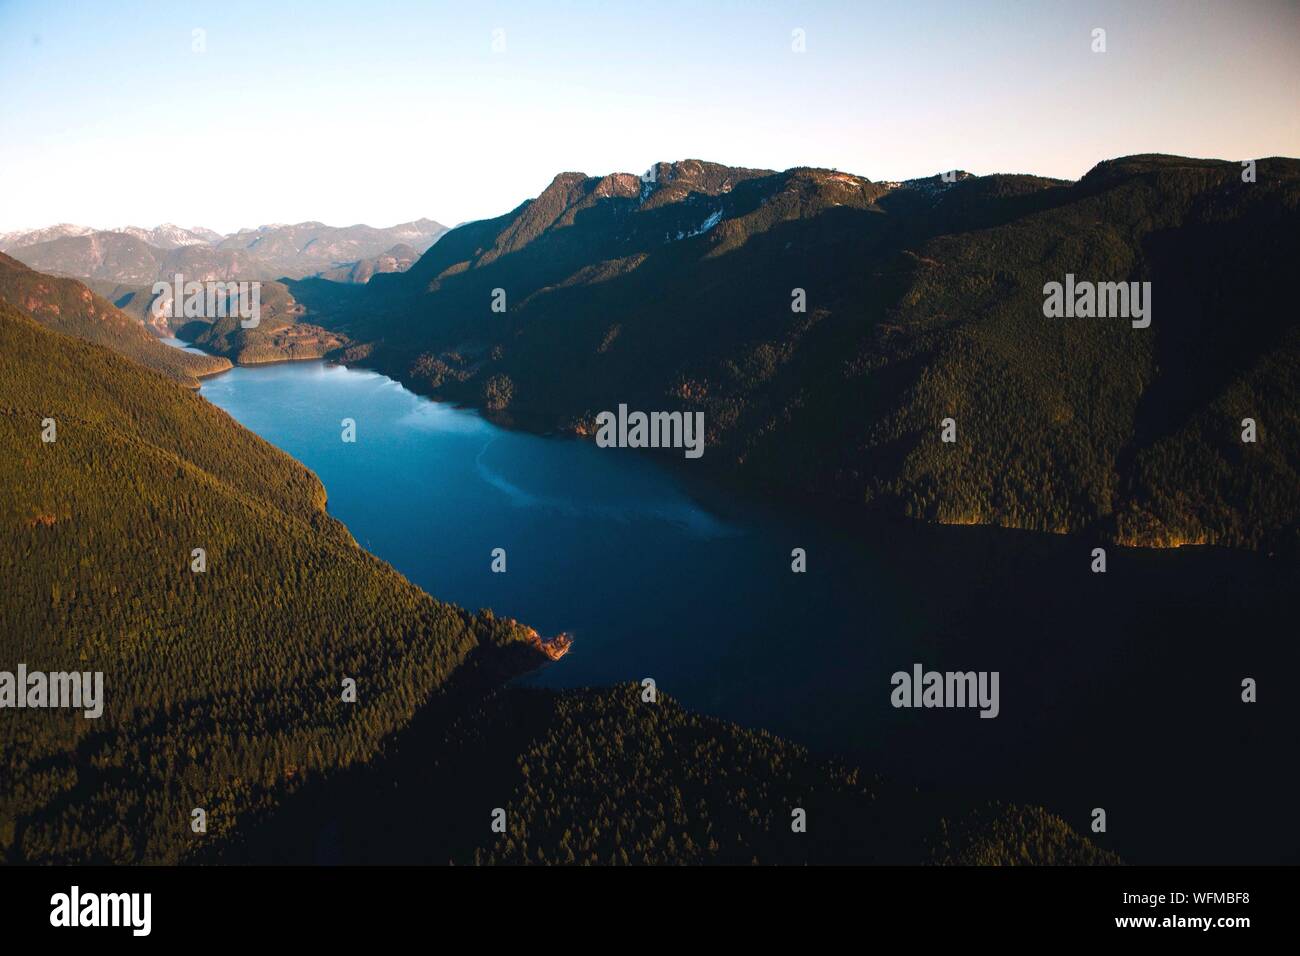 High Angle View Of Alouette Lake Amidst Mountains Stock Photo